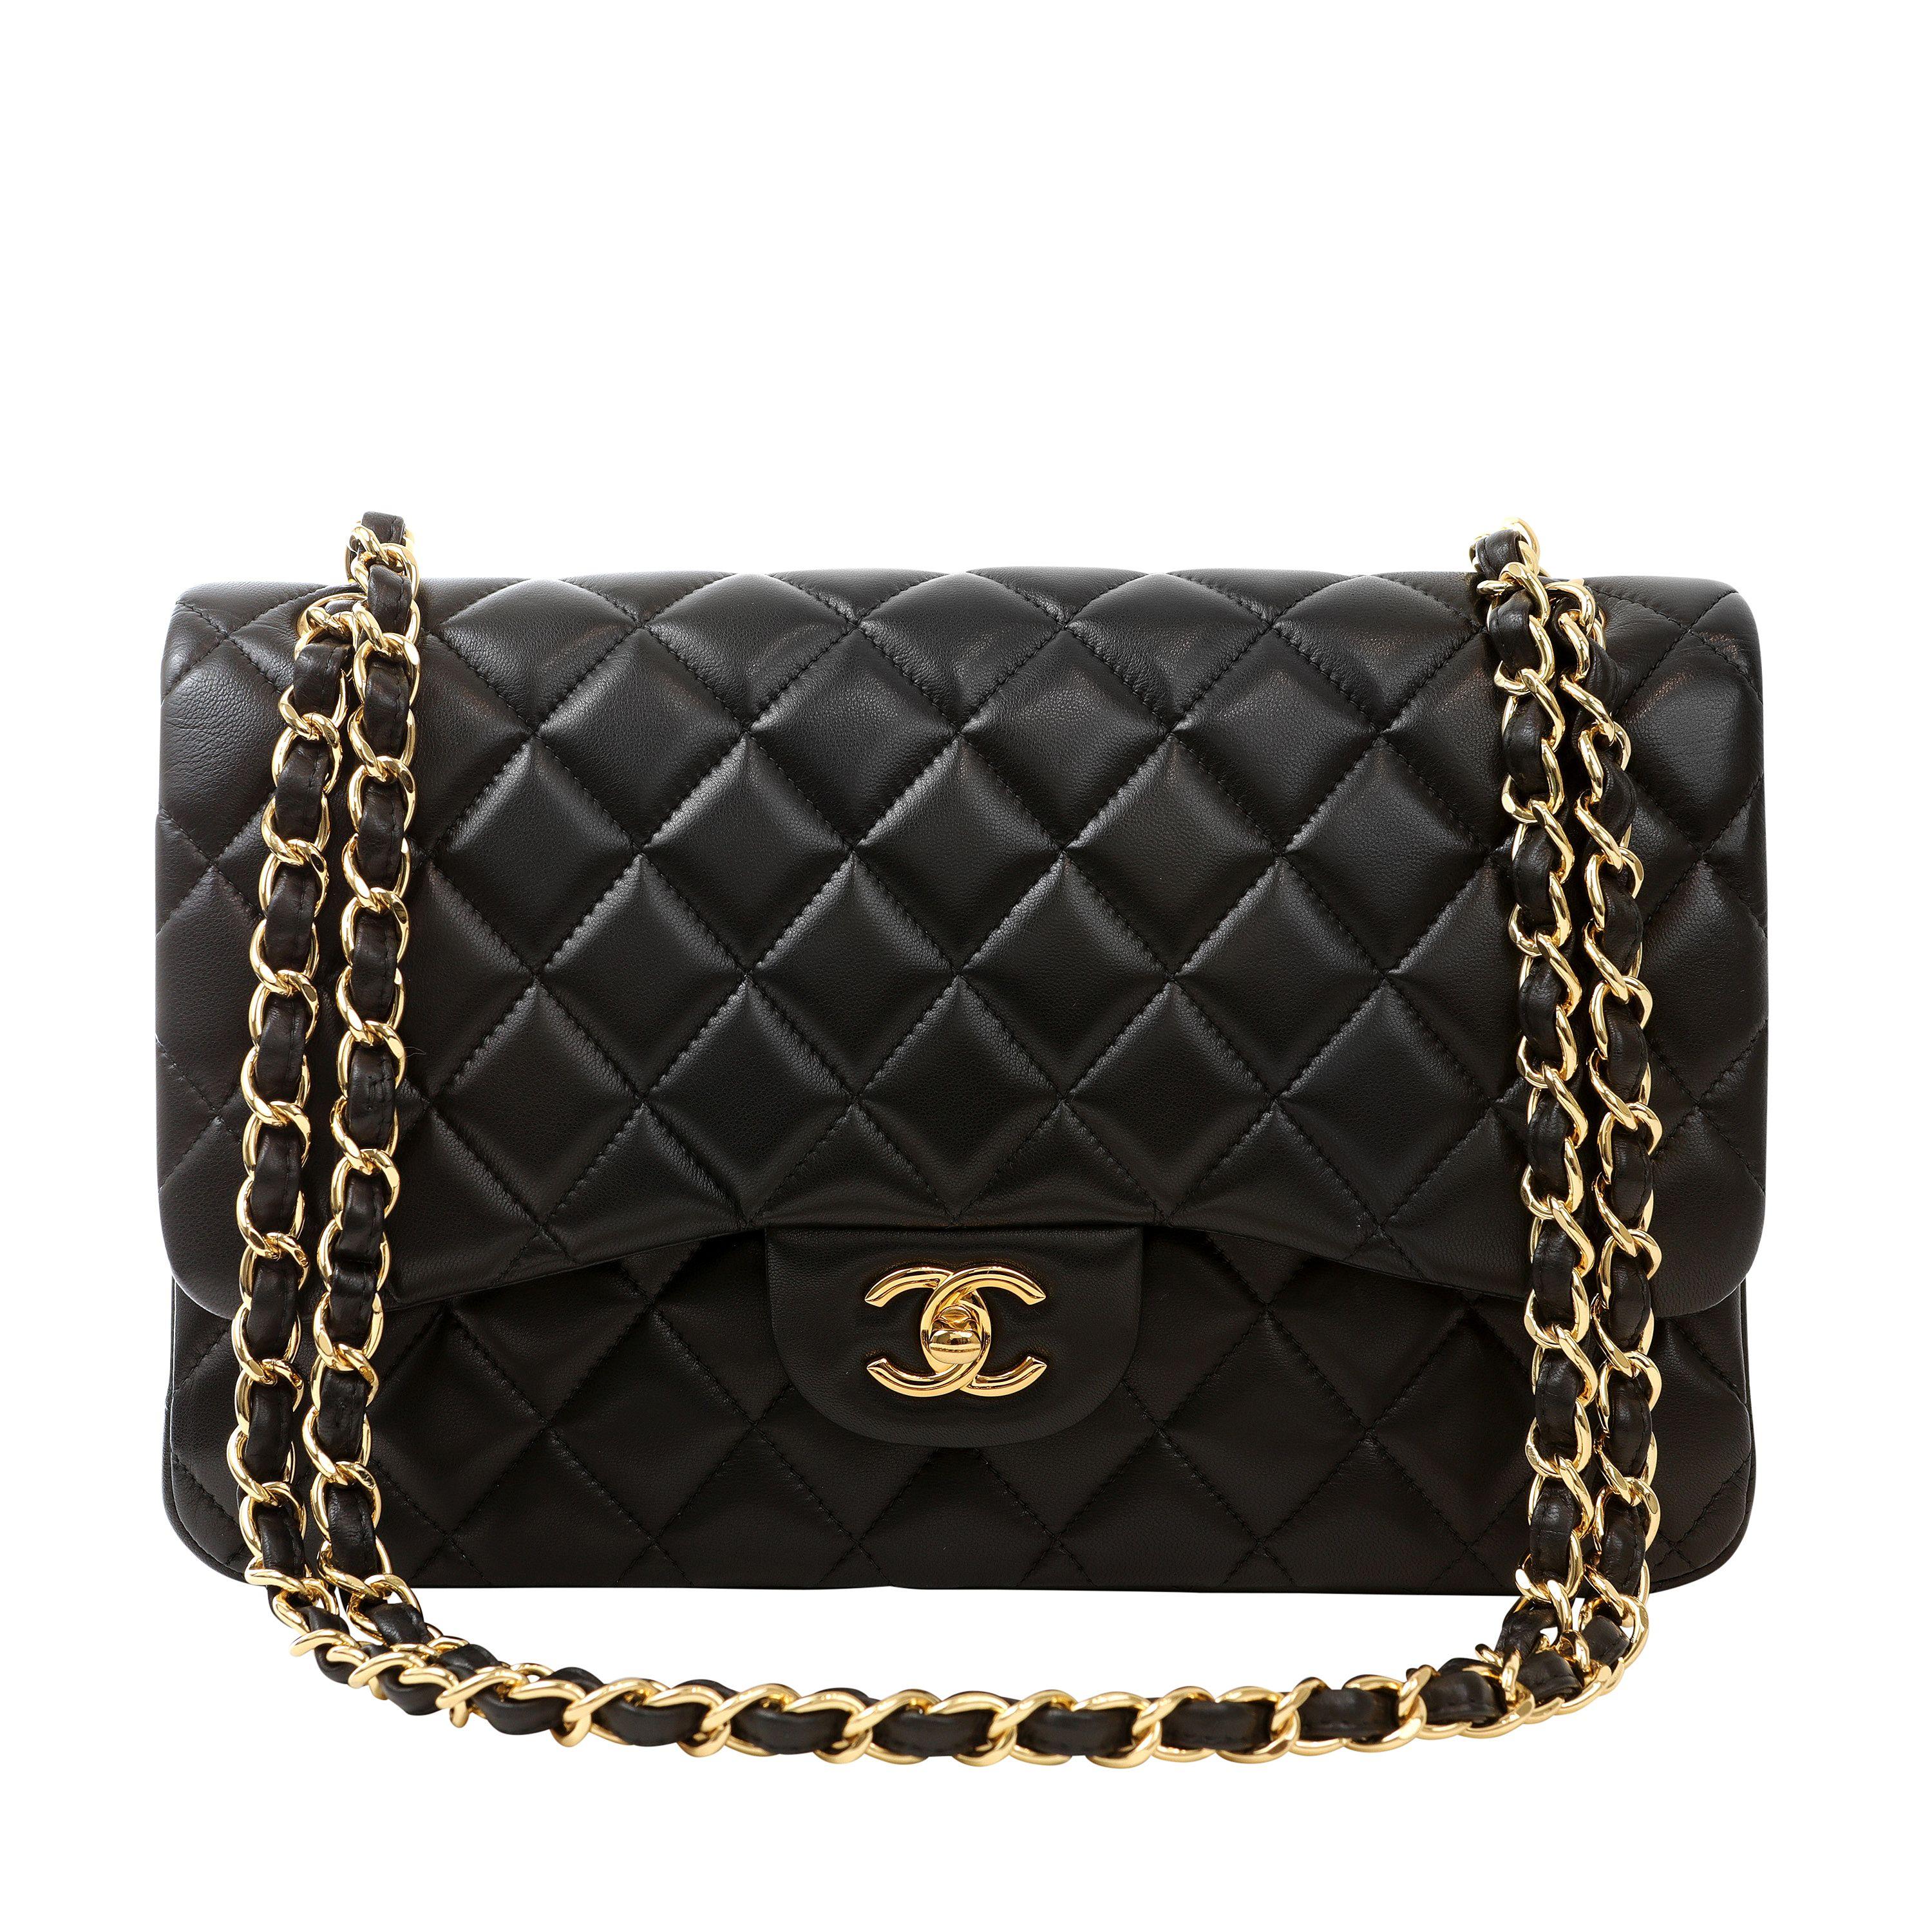 Chanel Black Lambskin Jumbo Classic with Gold Hardware In Excellent Condition For Sale In Palm Beach, FL